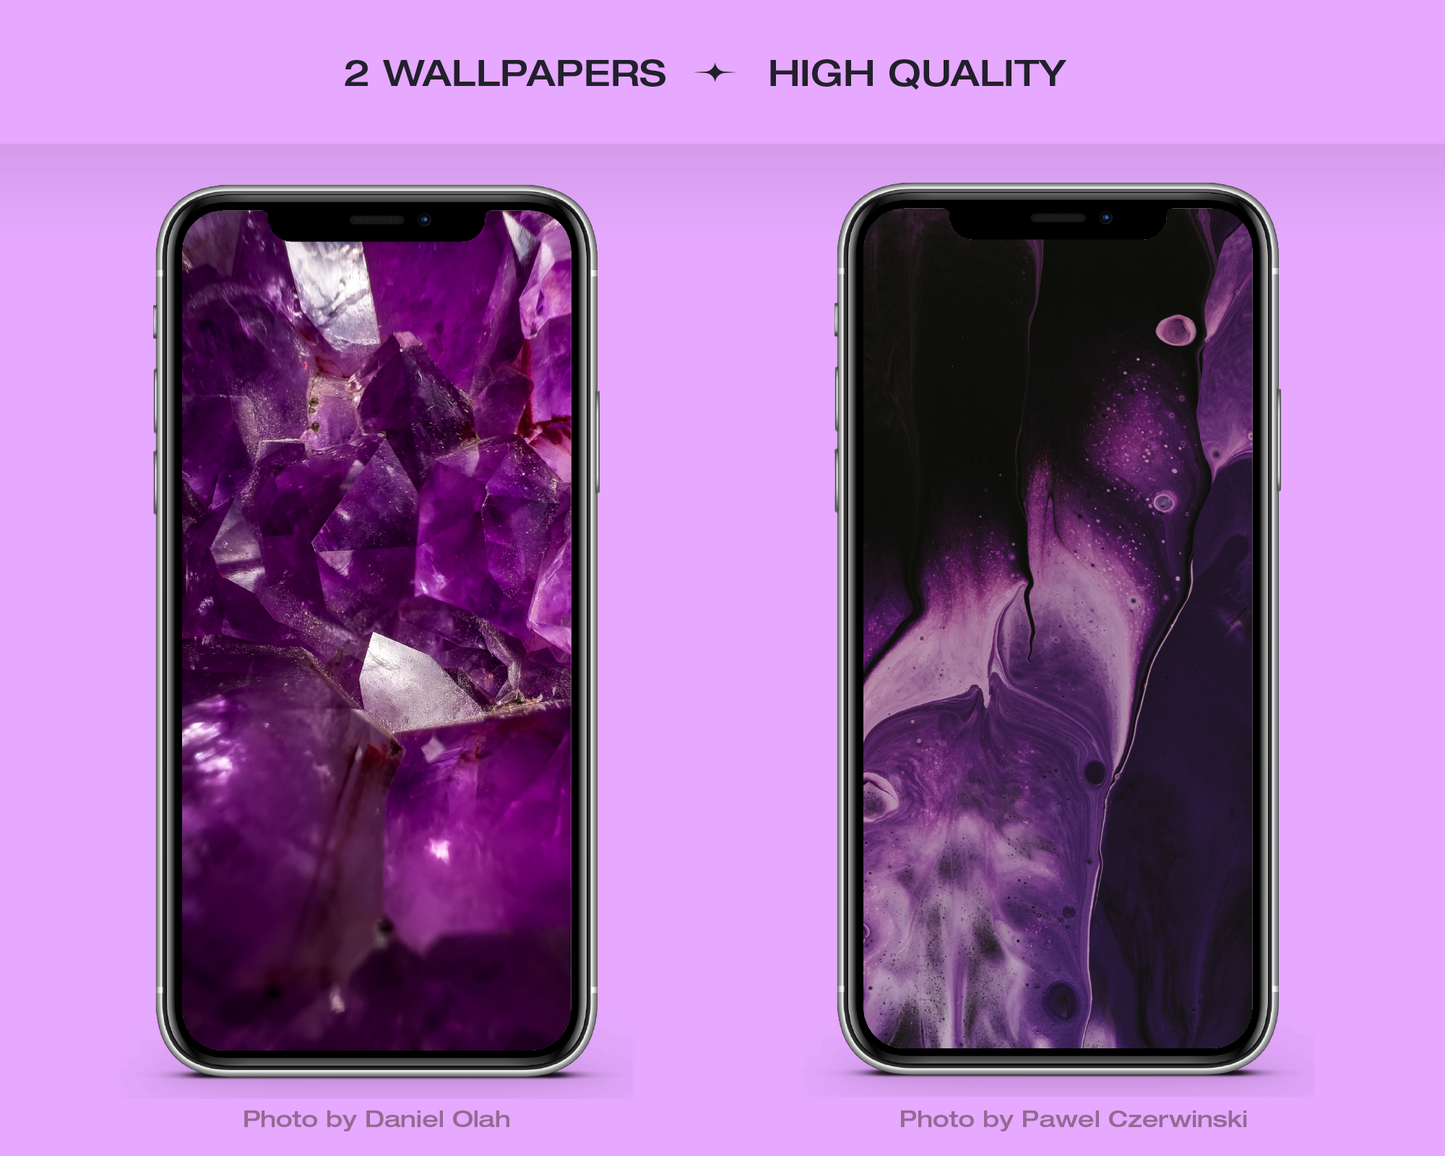 Amethyst Purple App Icon Pack for iOS